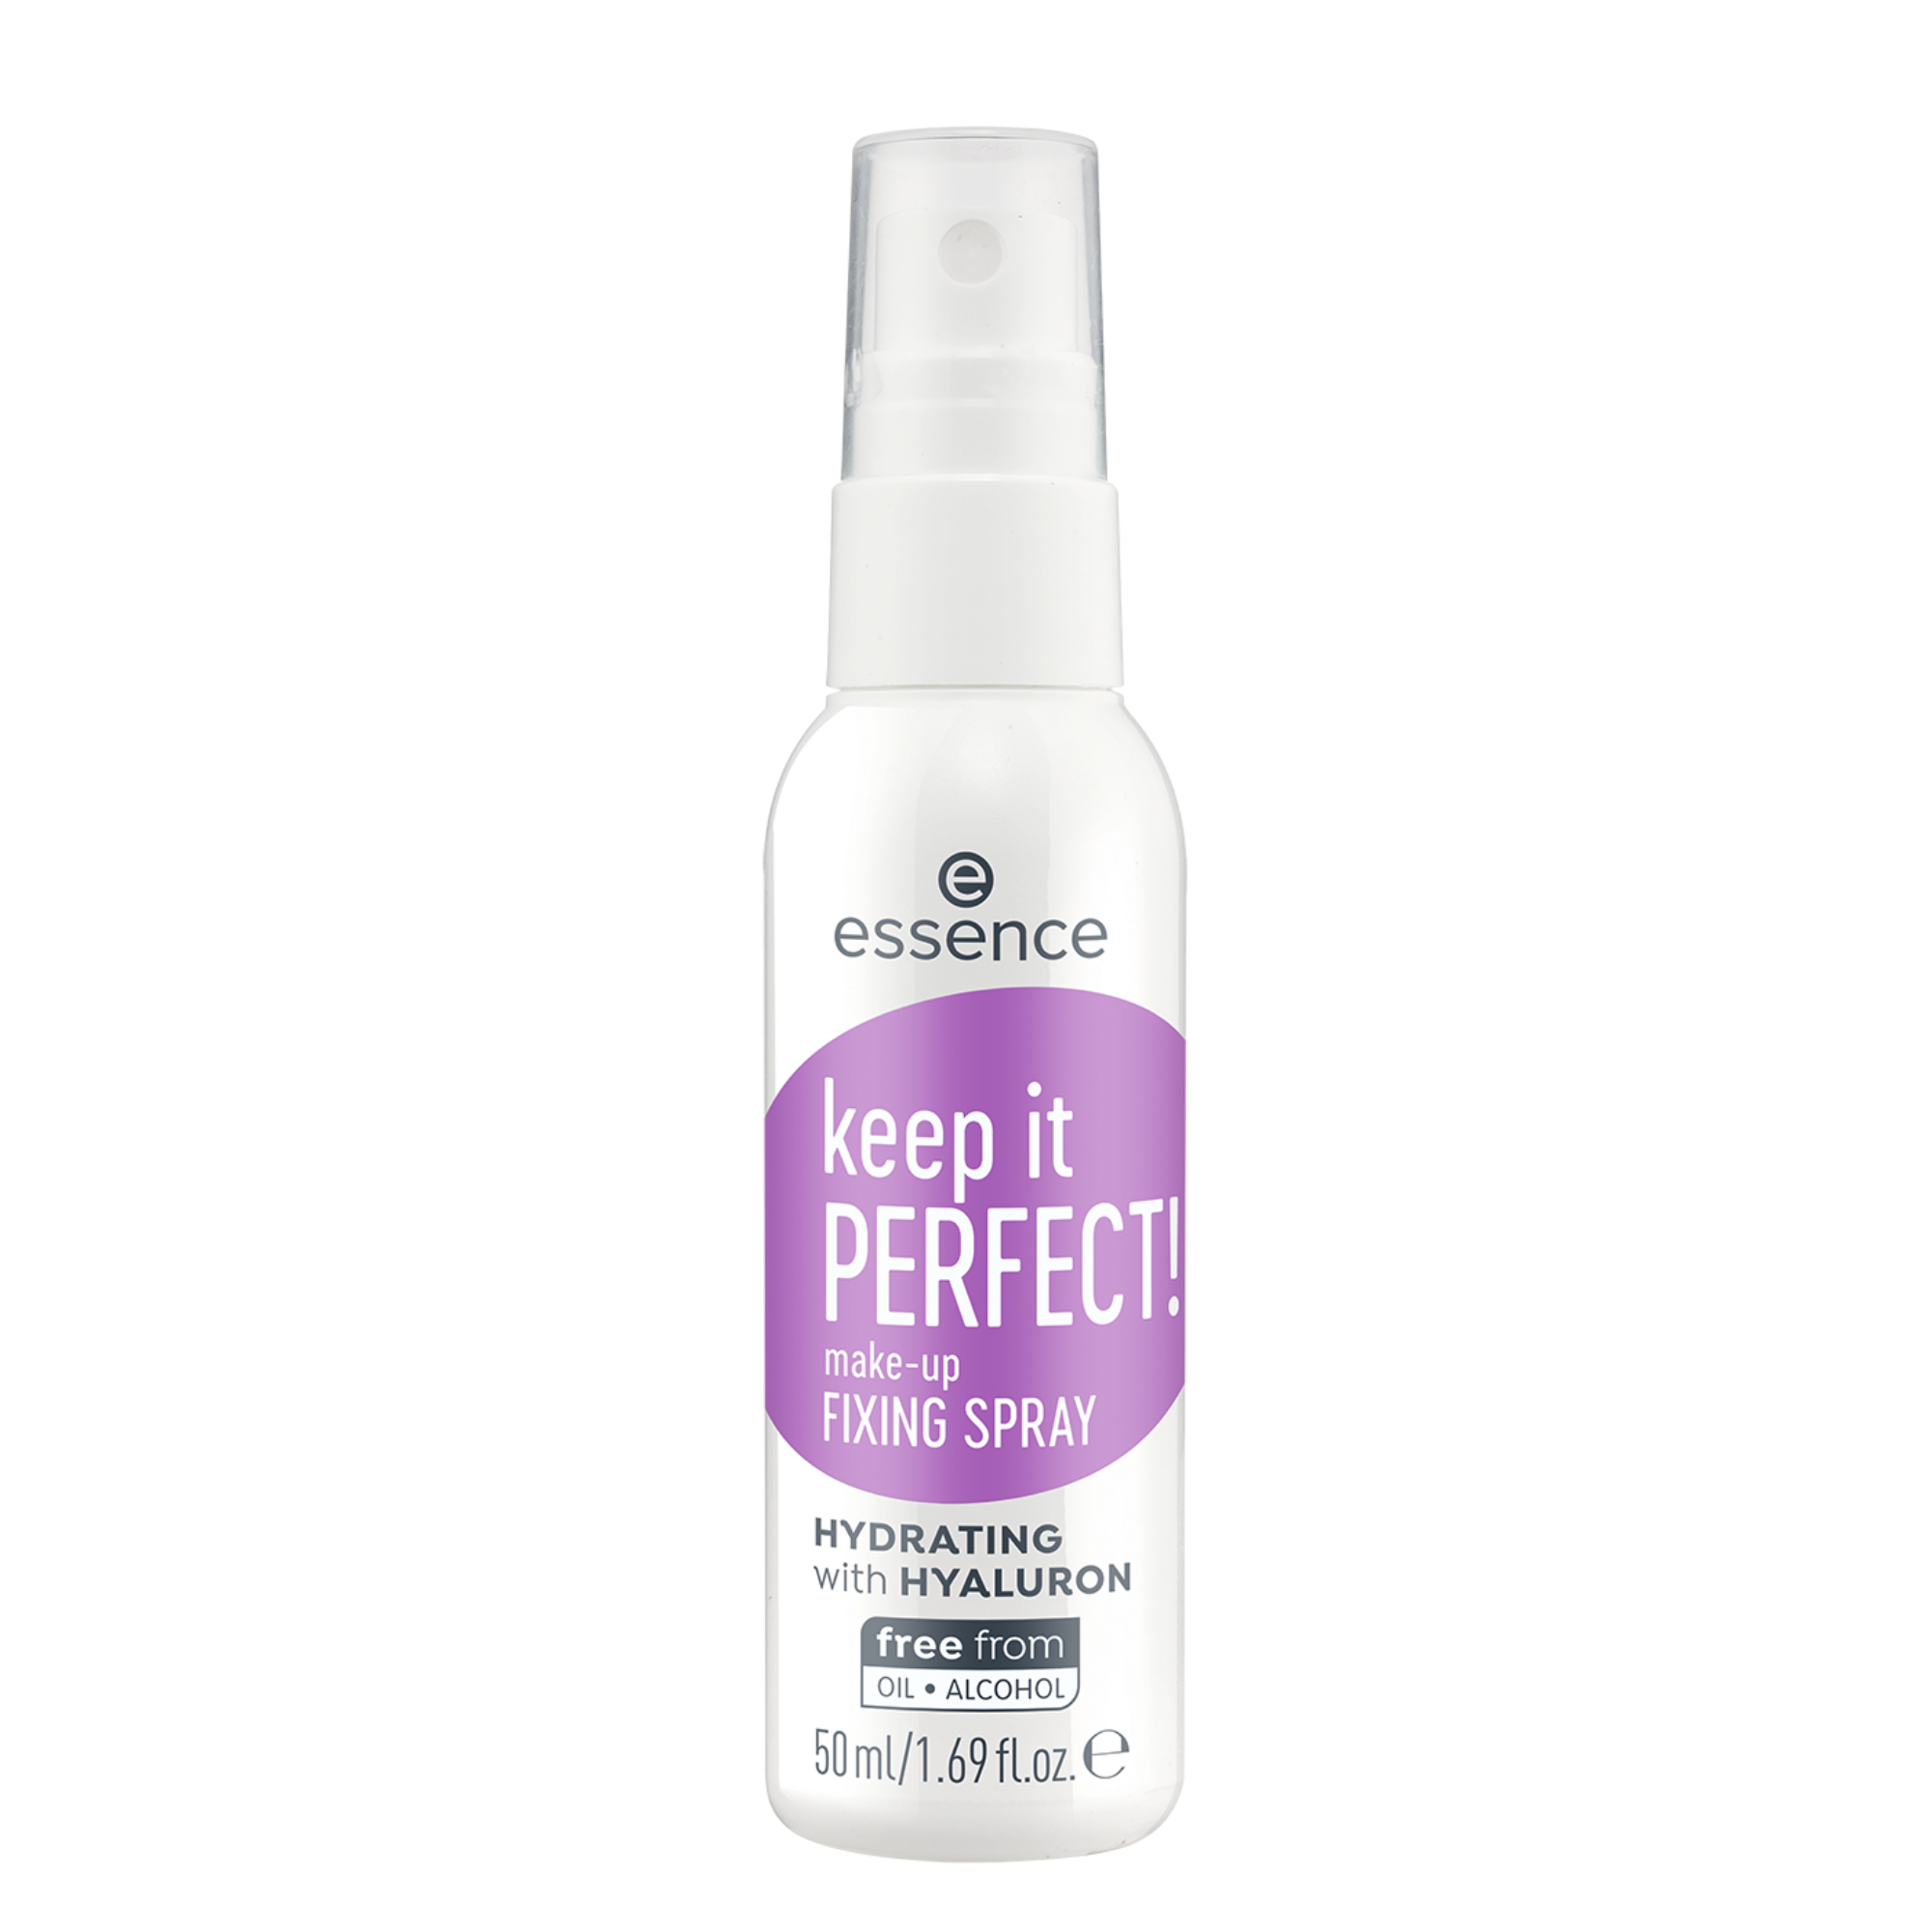 keep it PERFECT! make-up FIXING SPRAY